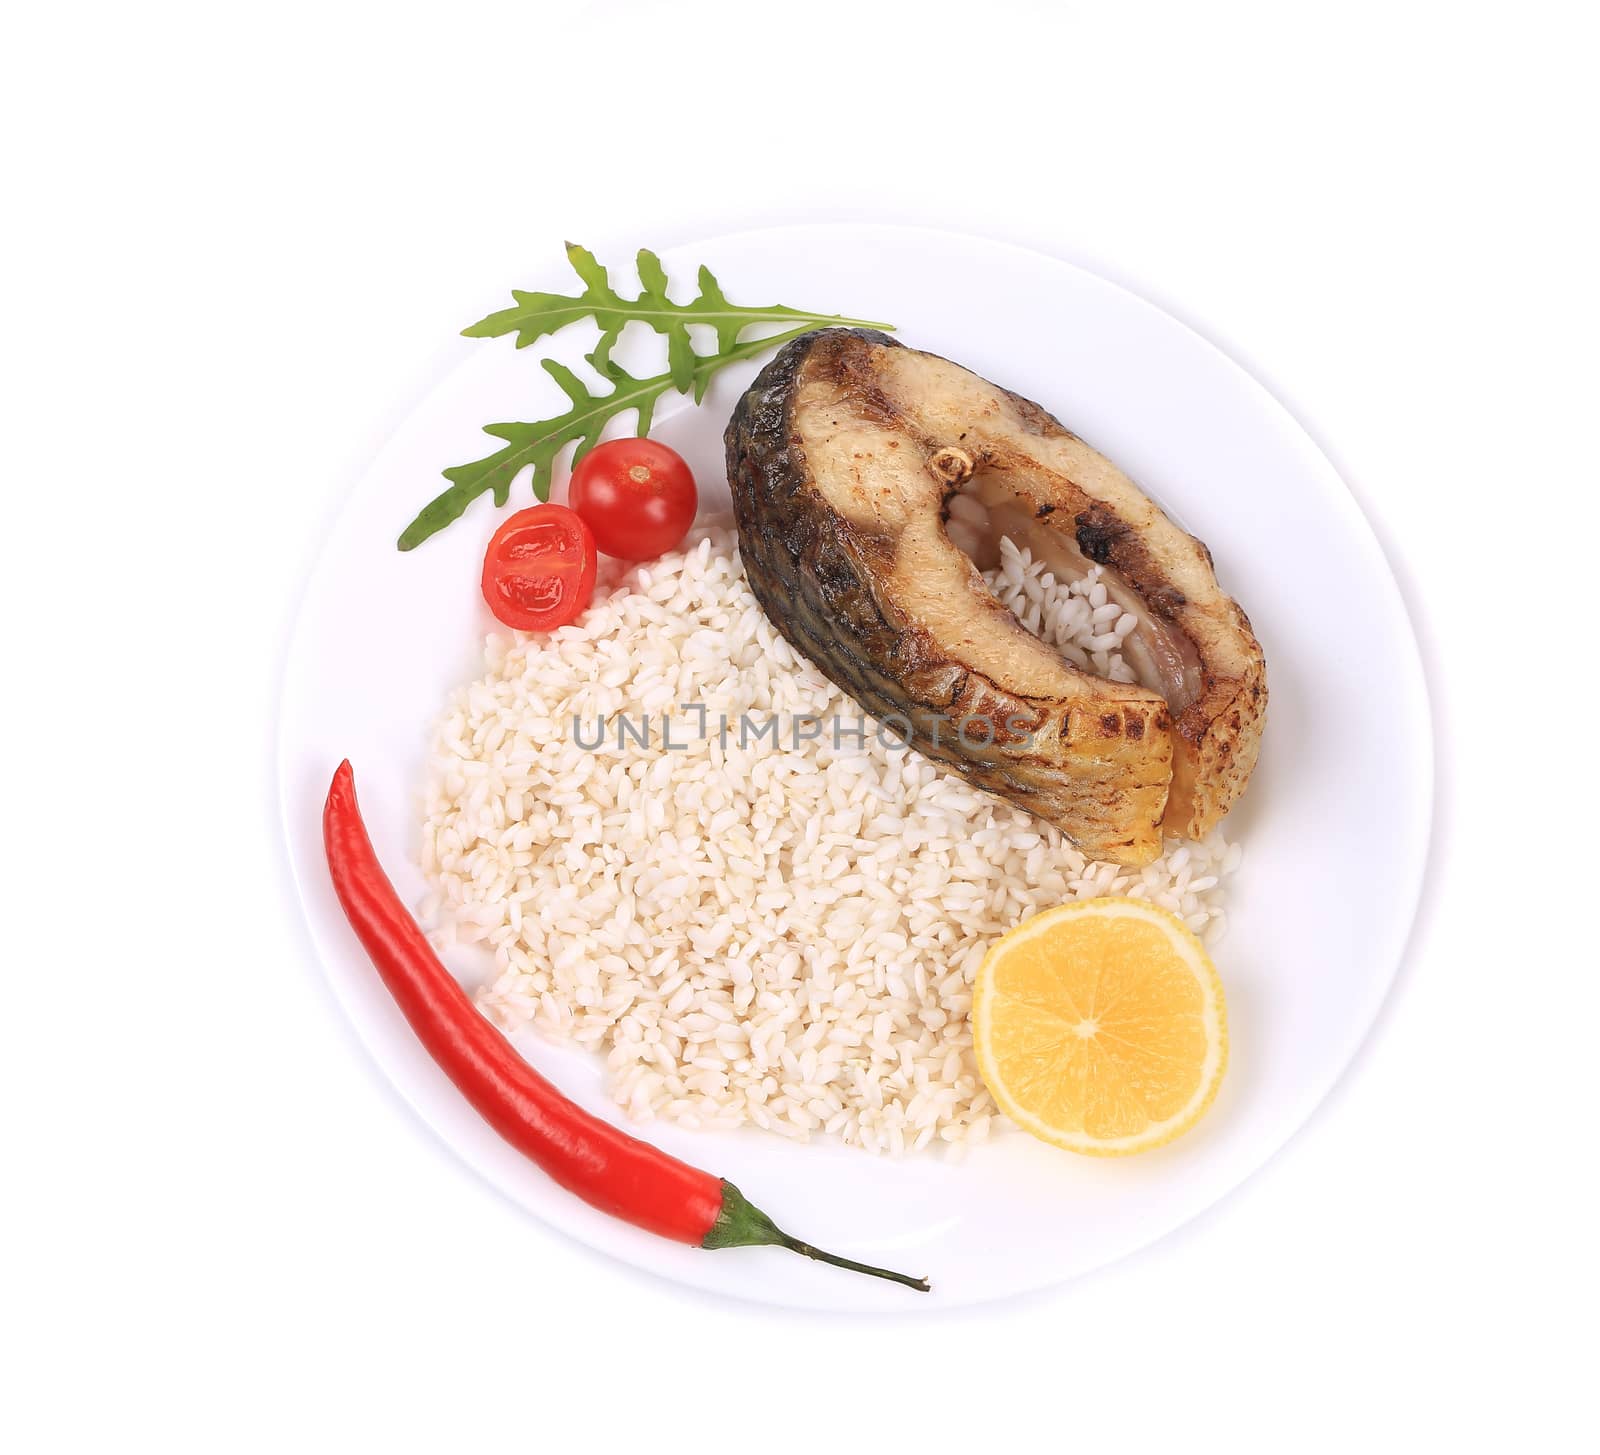 Grilled steak with rice. Isolated on a white background.